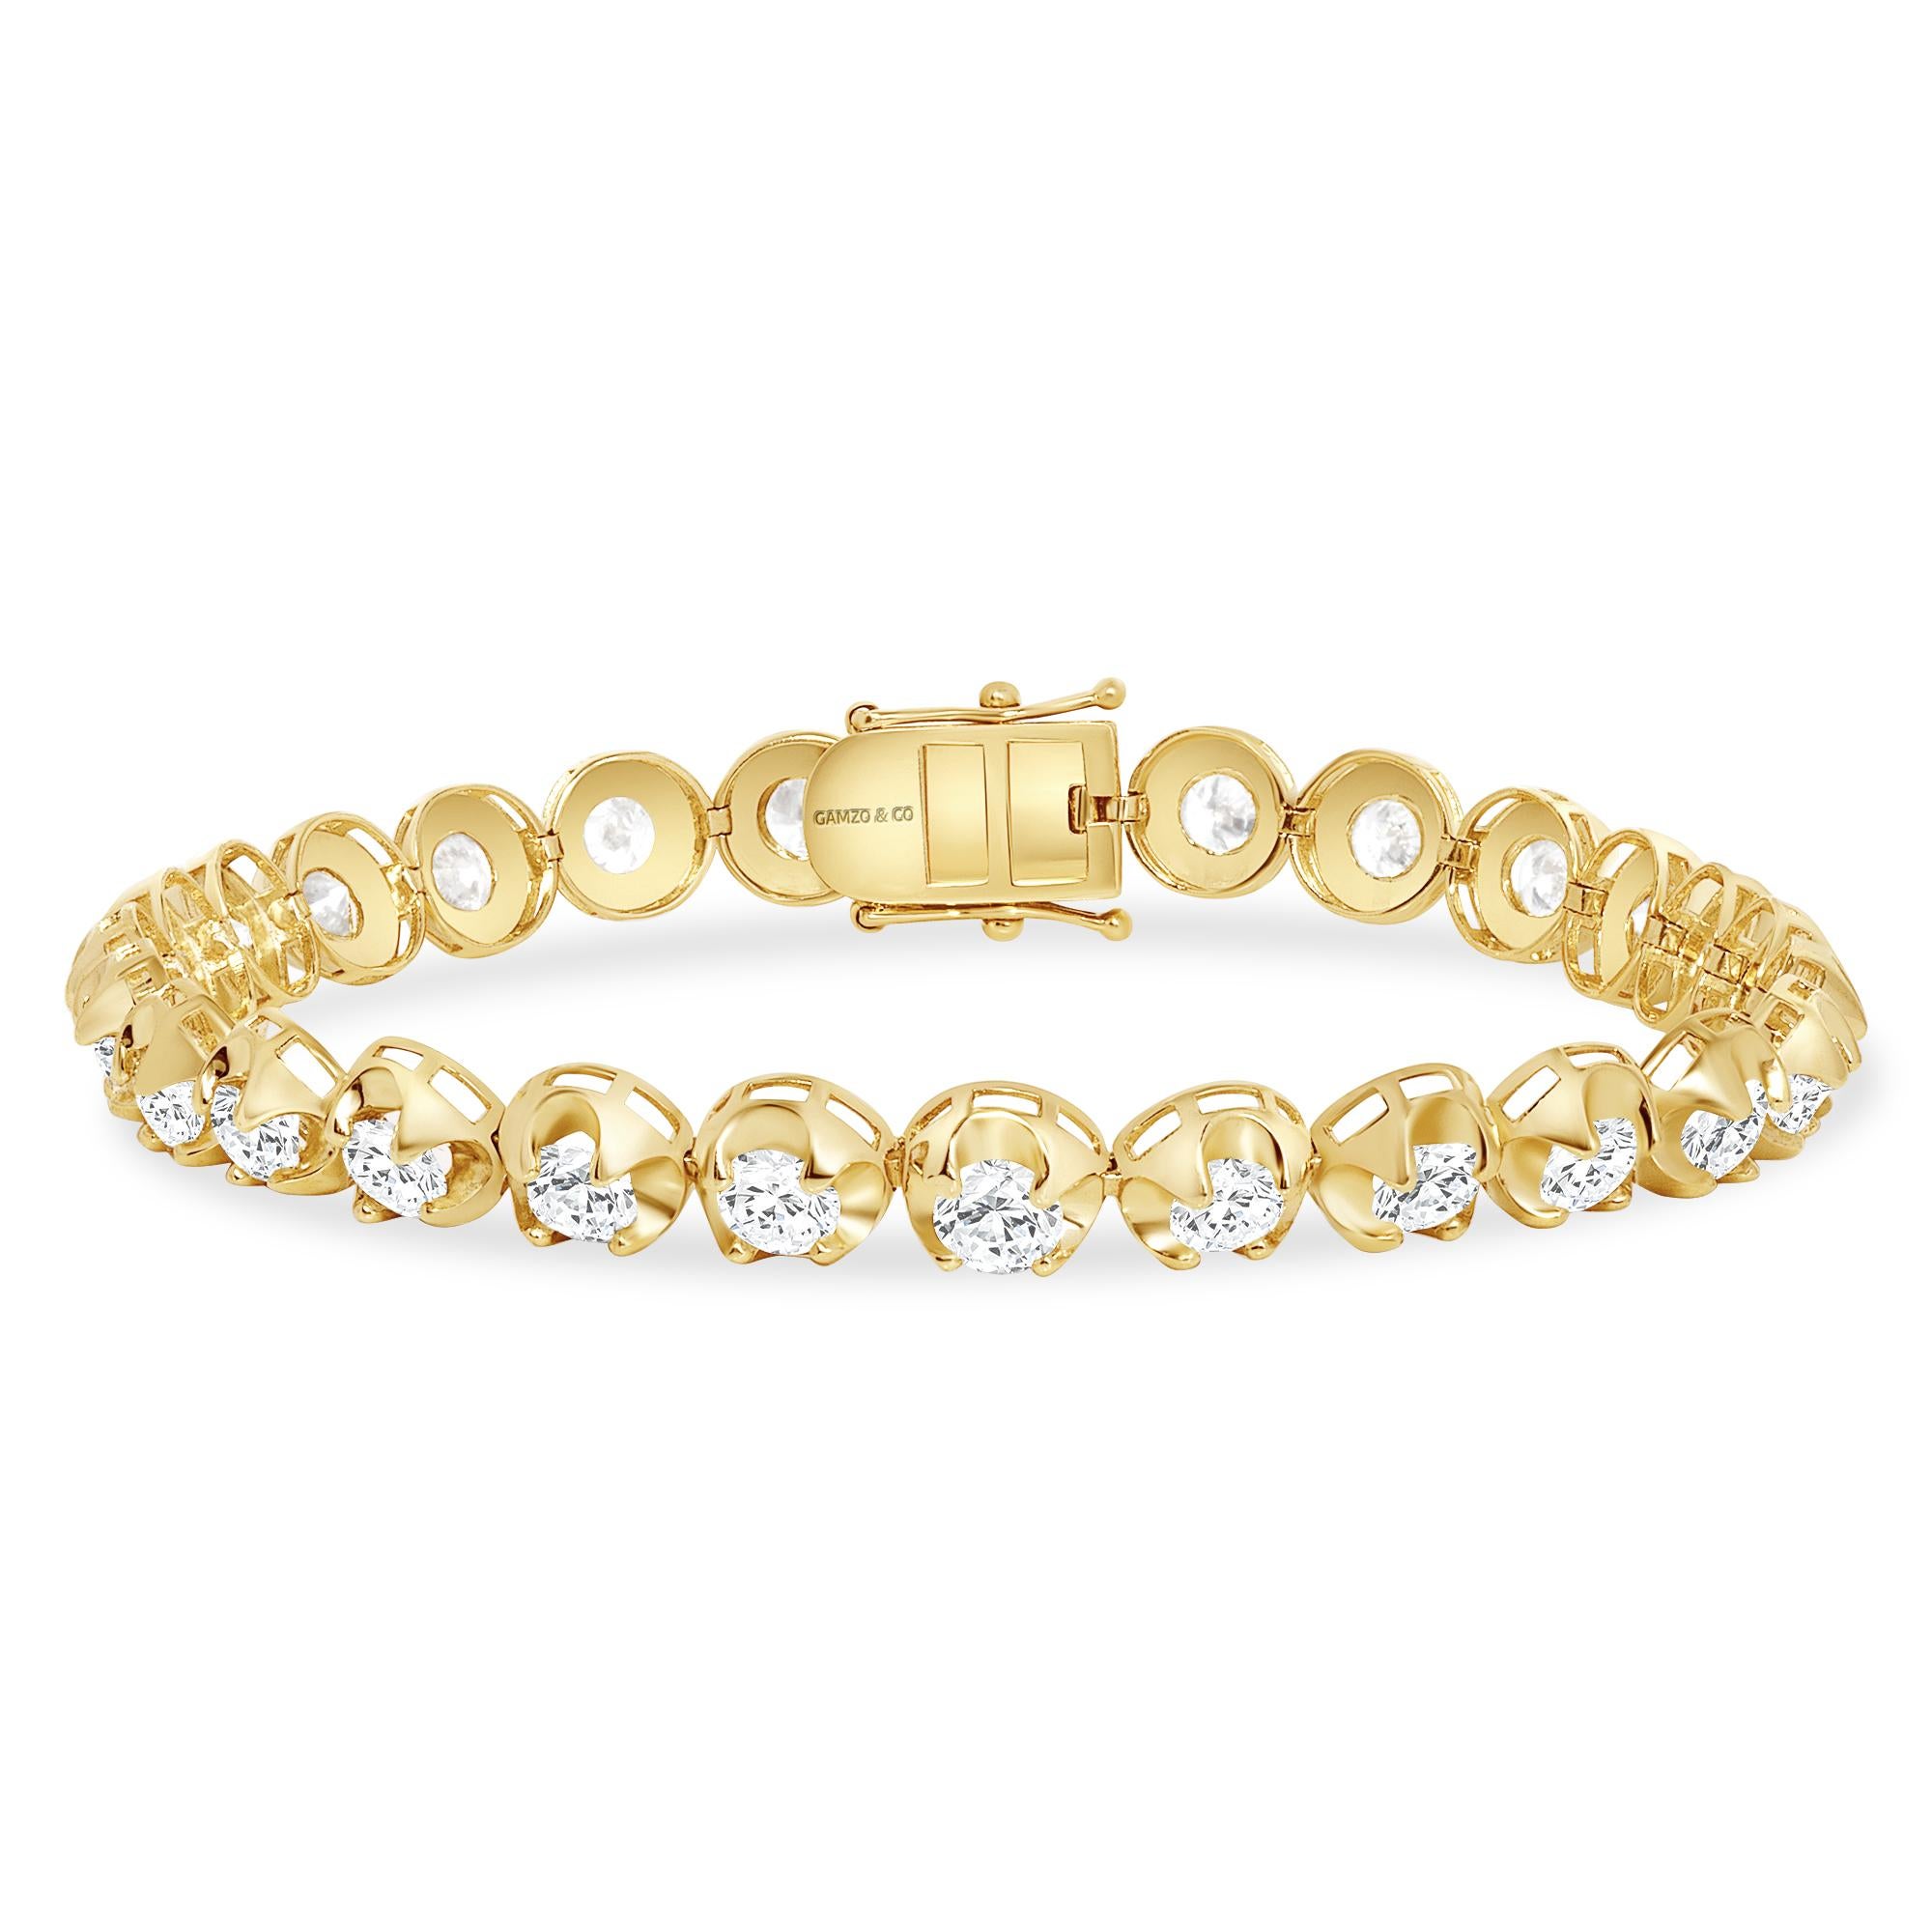 These beautiful round diamonds dance around your wrist as they absorb light and attention.
Metal: 14k Gold
Diamond Cut: Round
Diamond Total Carats: 7ct
Diamond Clarity: VS
Diamond Color: F
Color: Yellow Gold
Bracelet Length: 8 Inches 
Included with